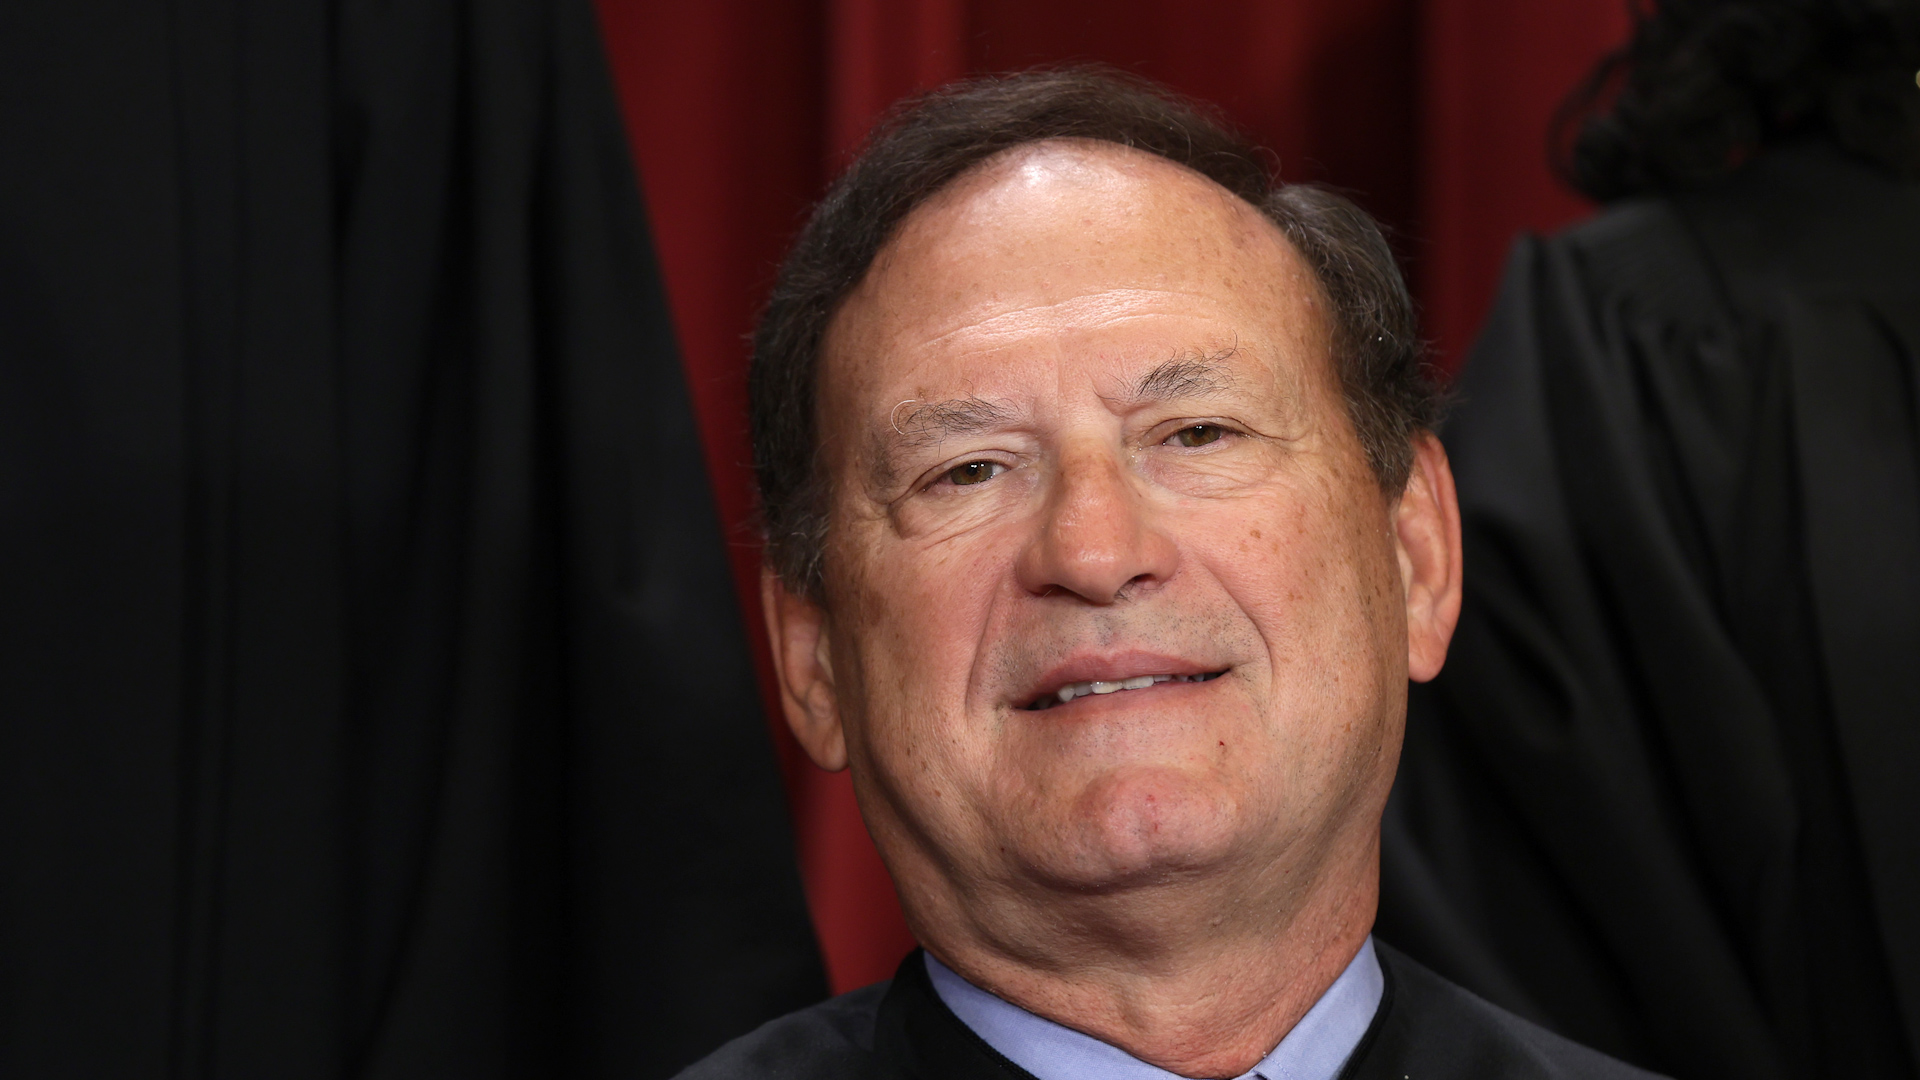 Justice Samuel Alito refuses recusal from Trump-related cases, denies knowledge of symbolic flags put up by his wife.